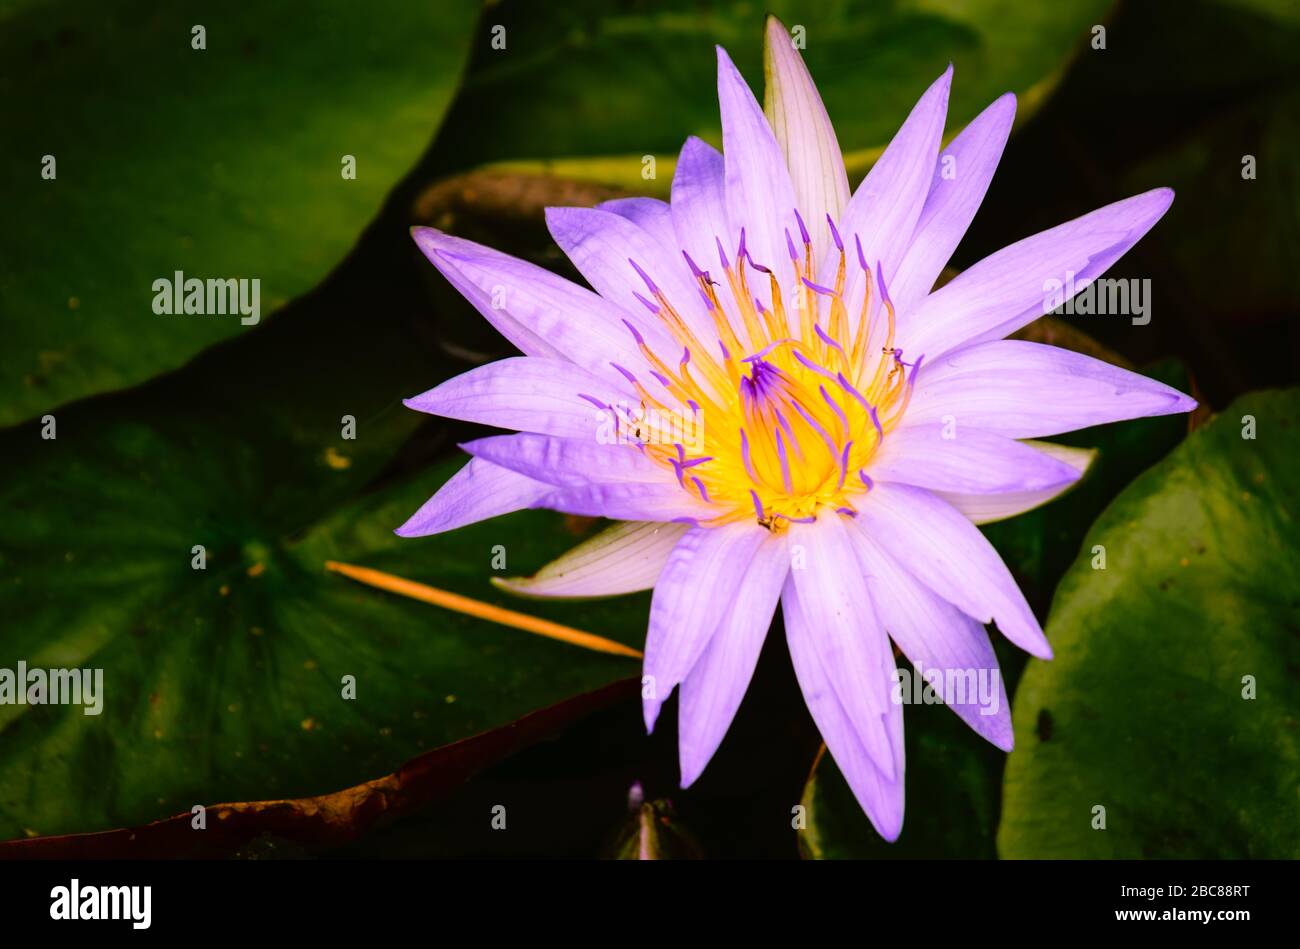 A close up shot of a lily Stock Photo